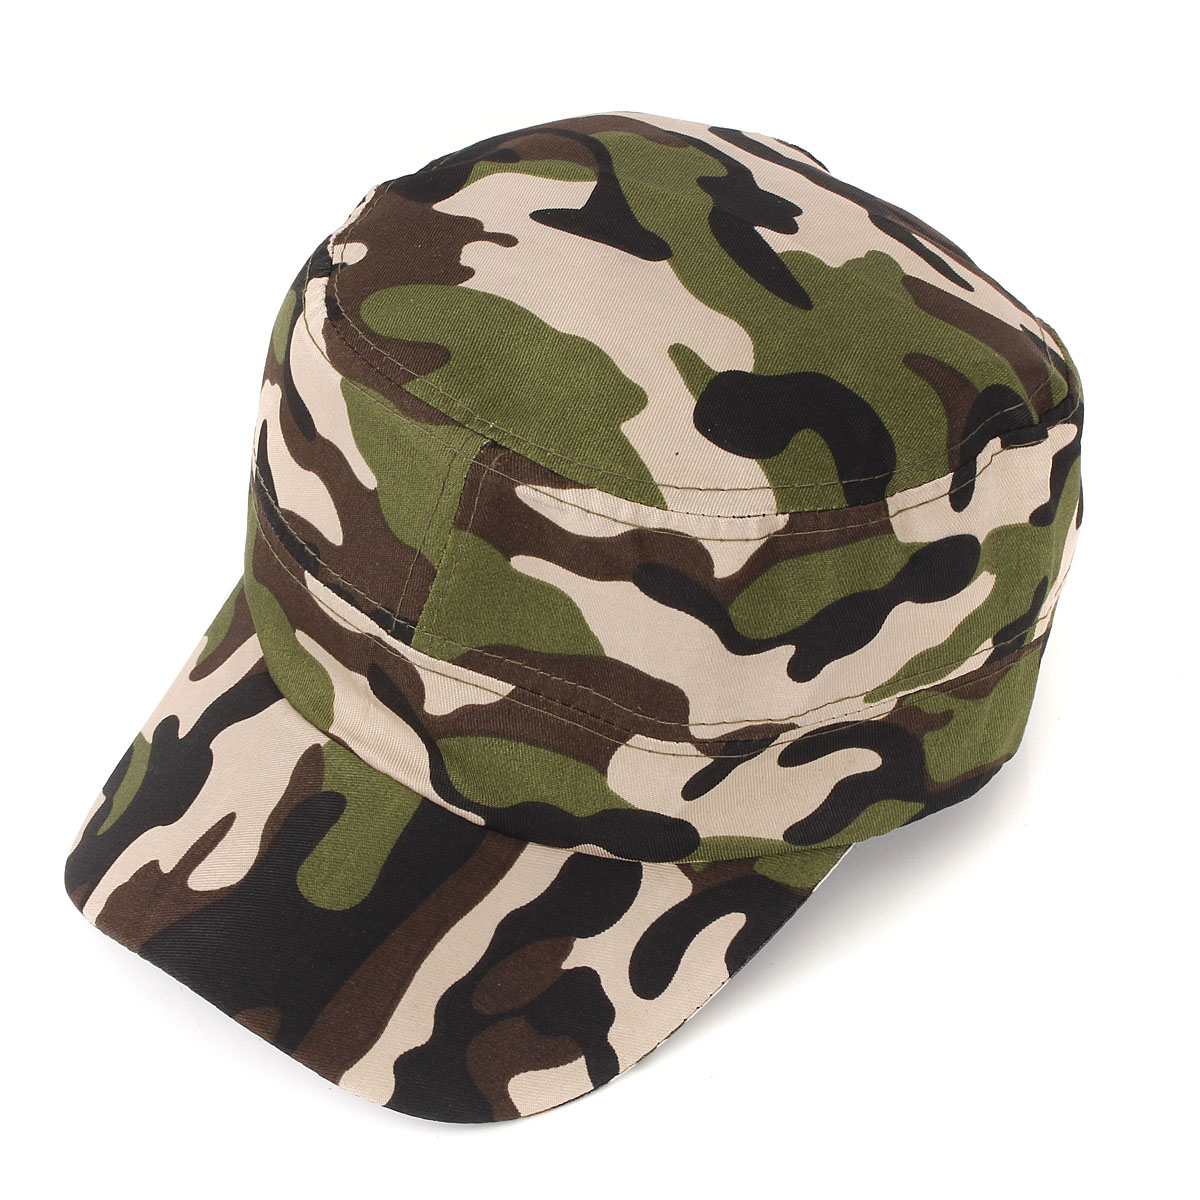 Camouflage Army Camo Baseball Cap Forest Hunting Adjustable Cadet ...